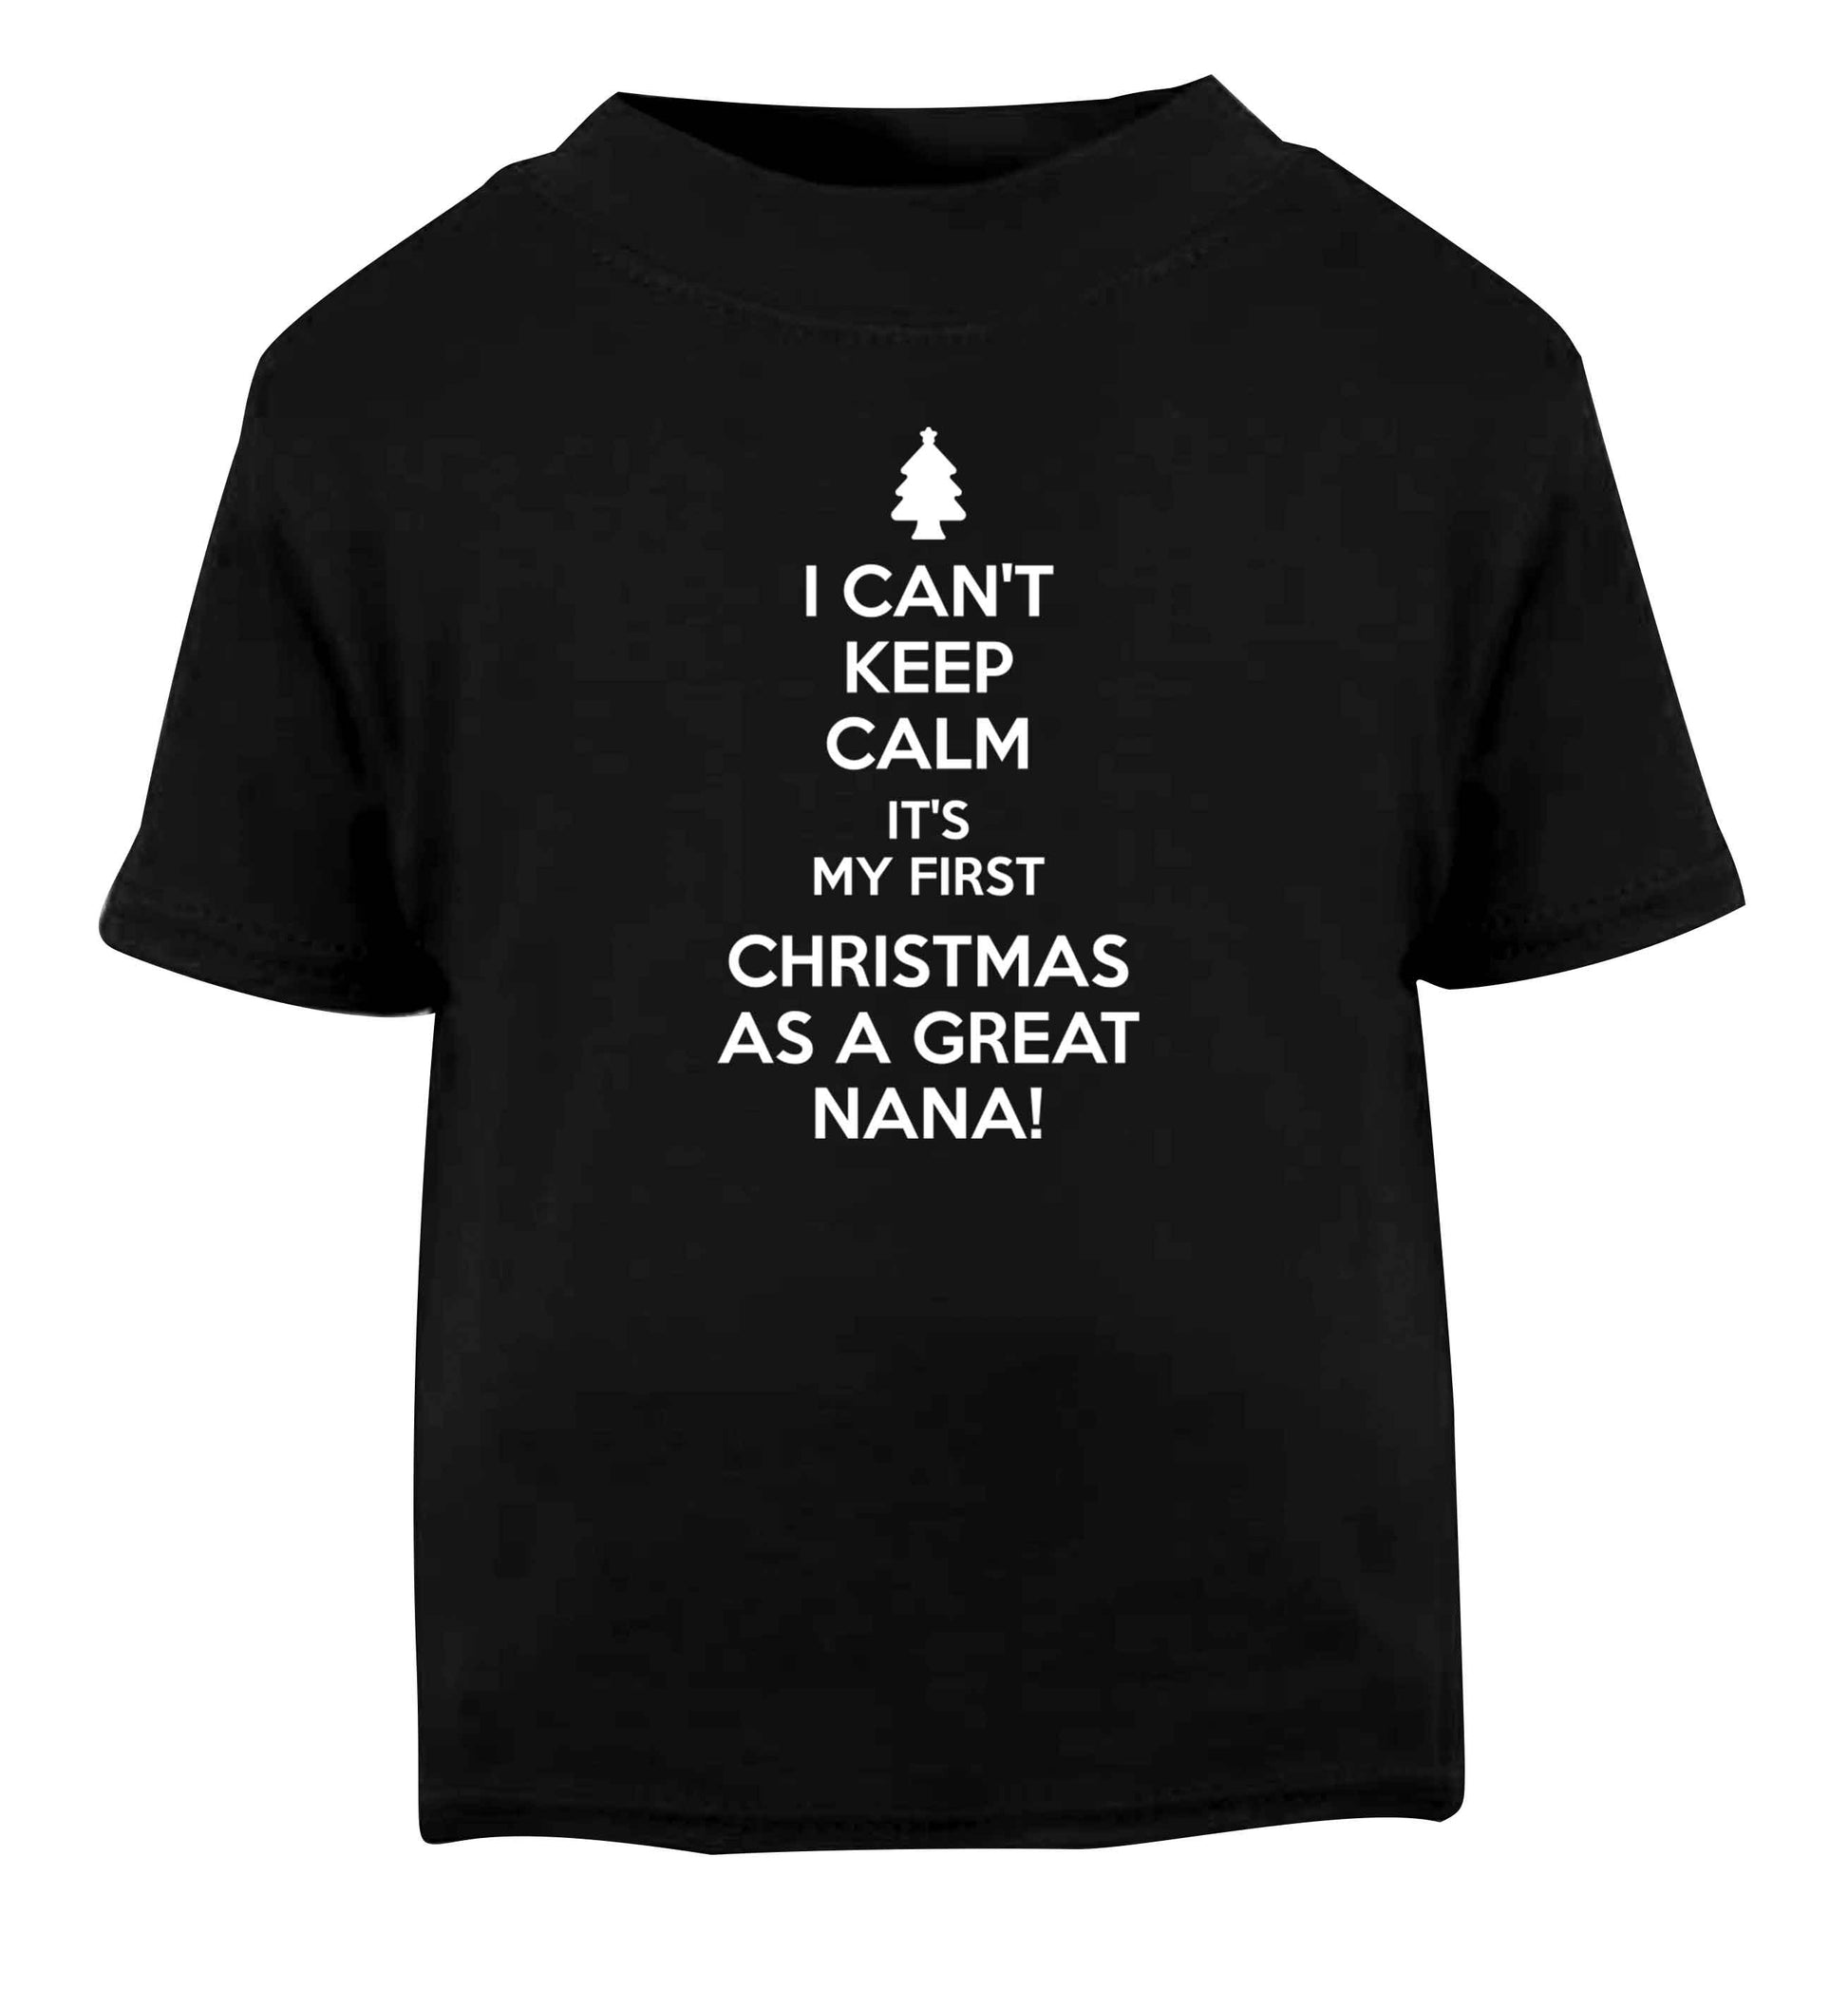 I can't keep calm it's my first Christmas as a great nana! Black Baby Toddler Tshirt 2 years